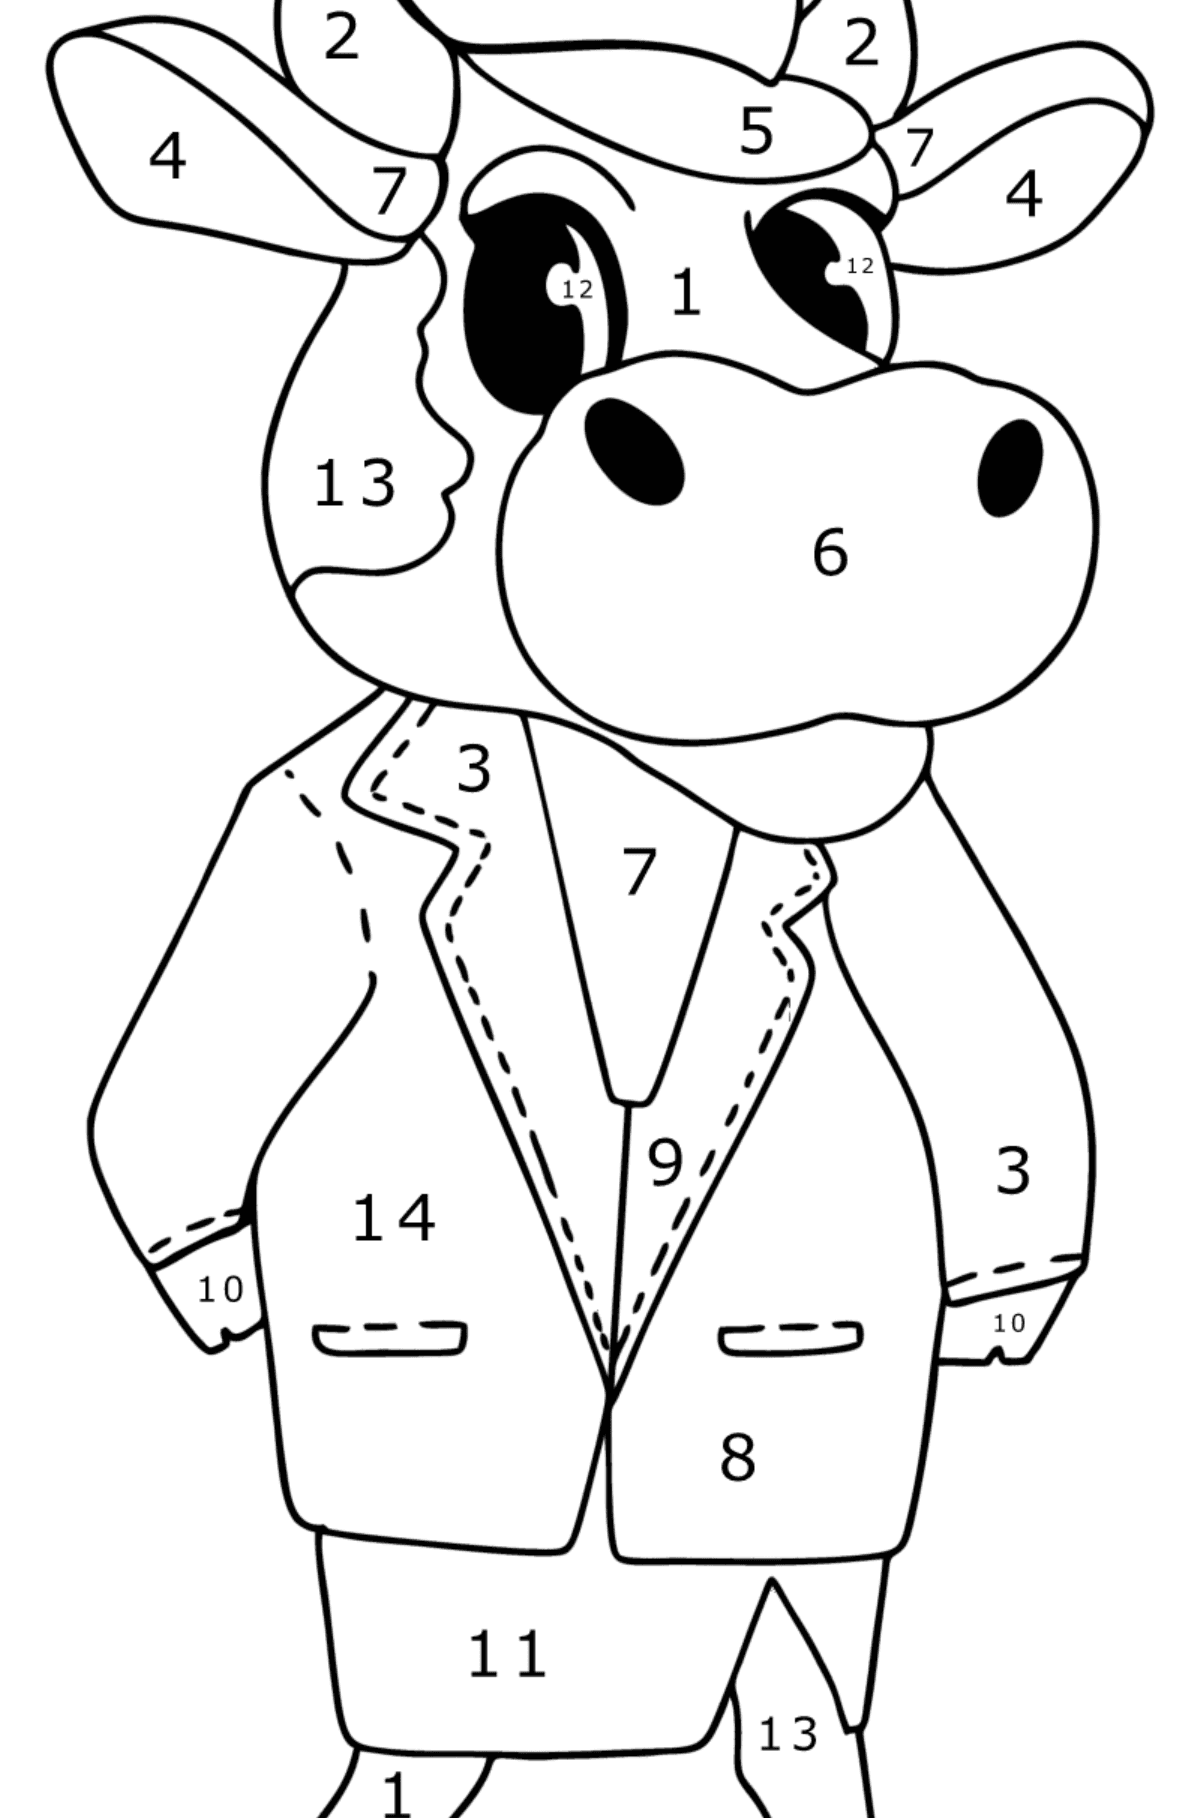 Cartoon cow coloring page - Coloring by Numbers for Kids